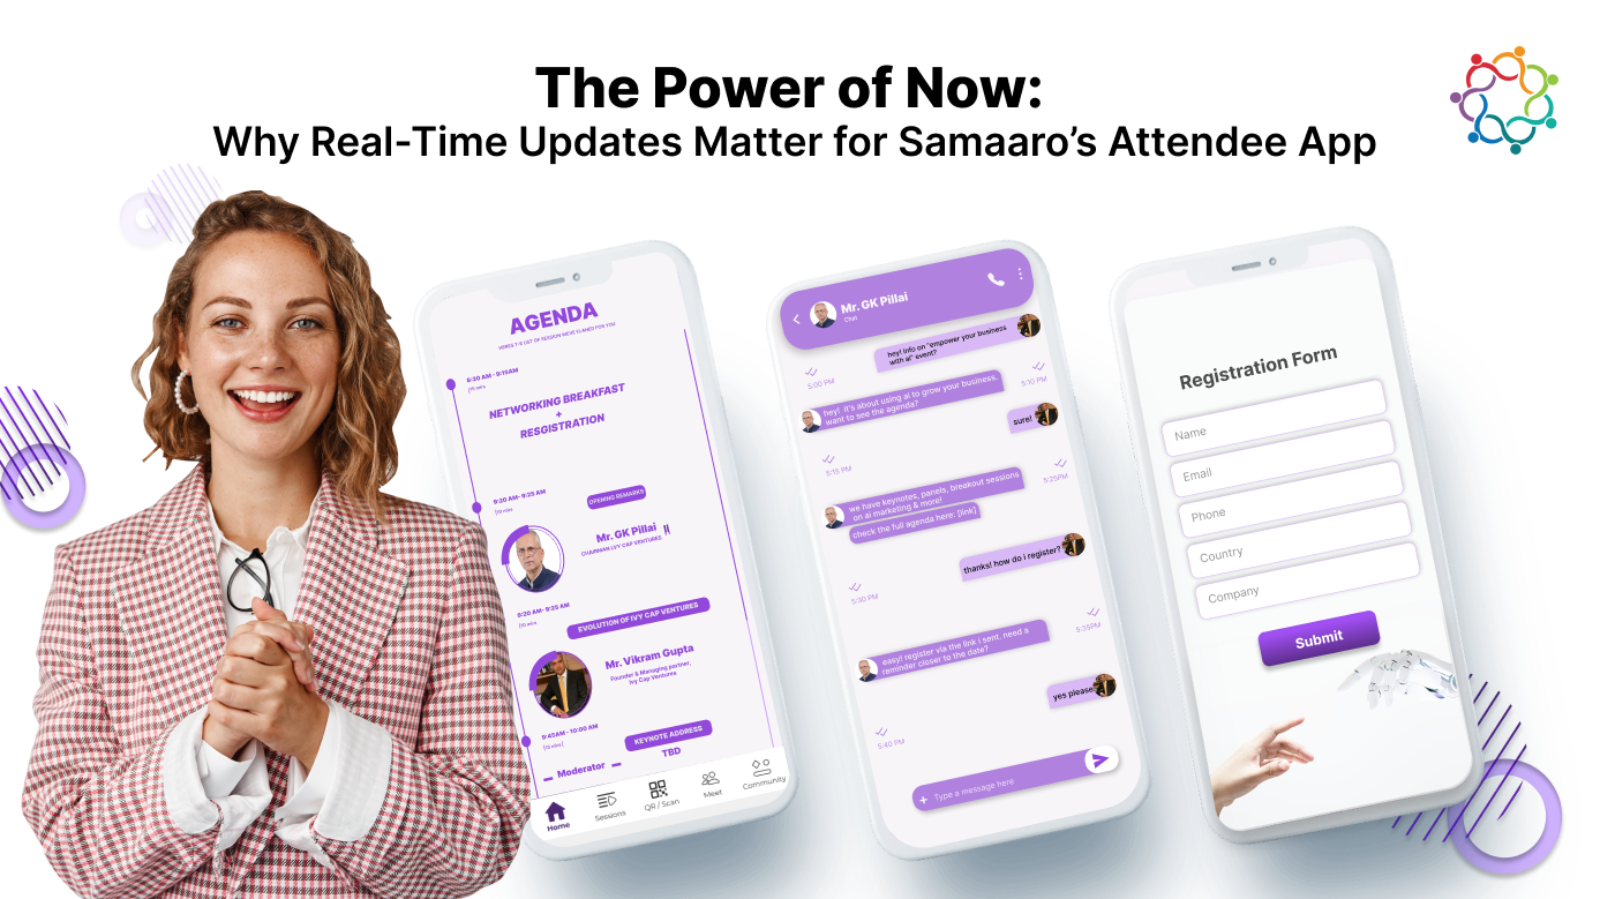 The Power of Now- Why Real-Time Updates Matter for Samaaro’s Attendee App